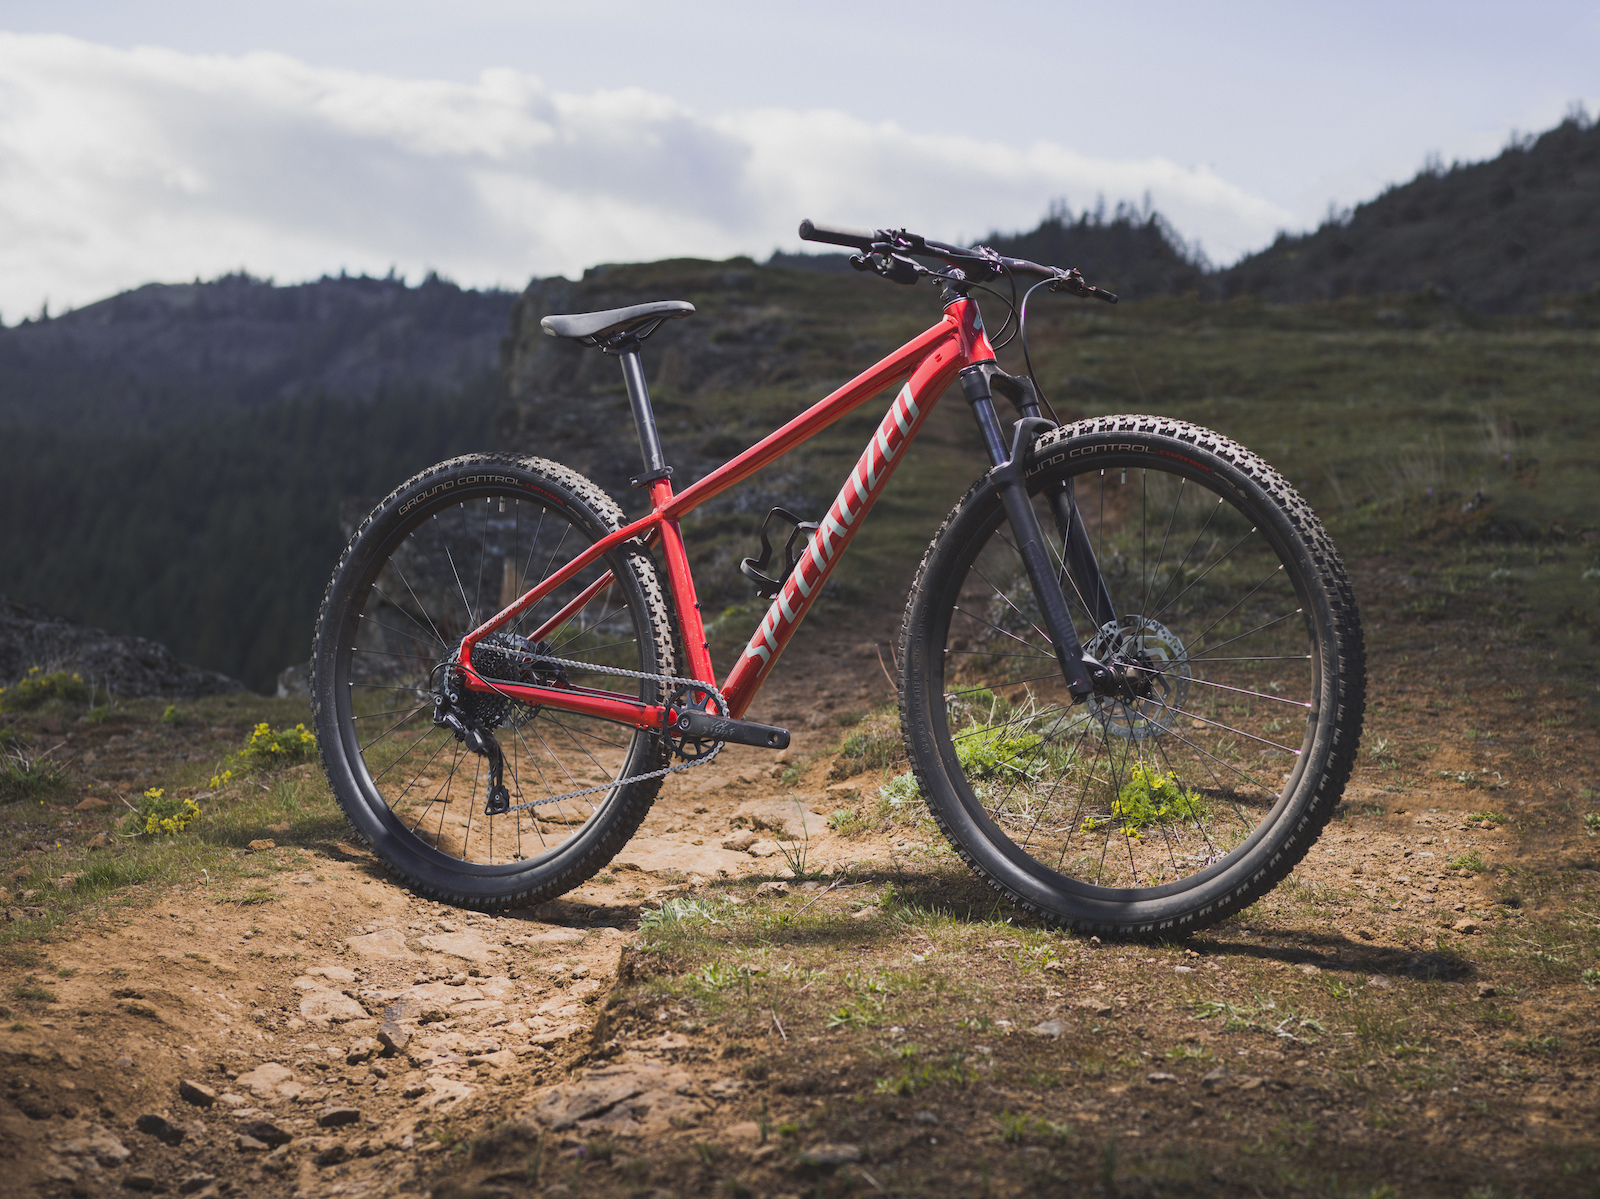 2020 / 2021 Hardtail Check Out